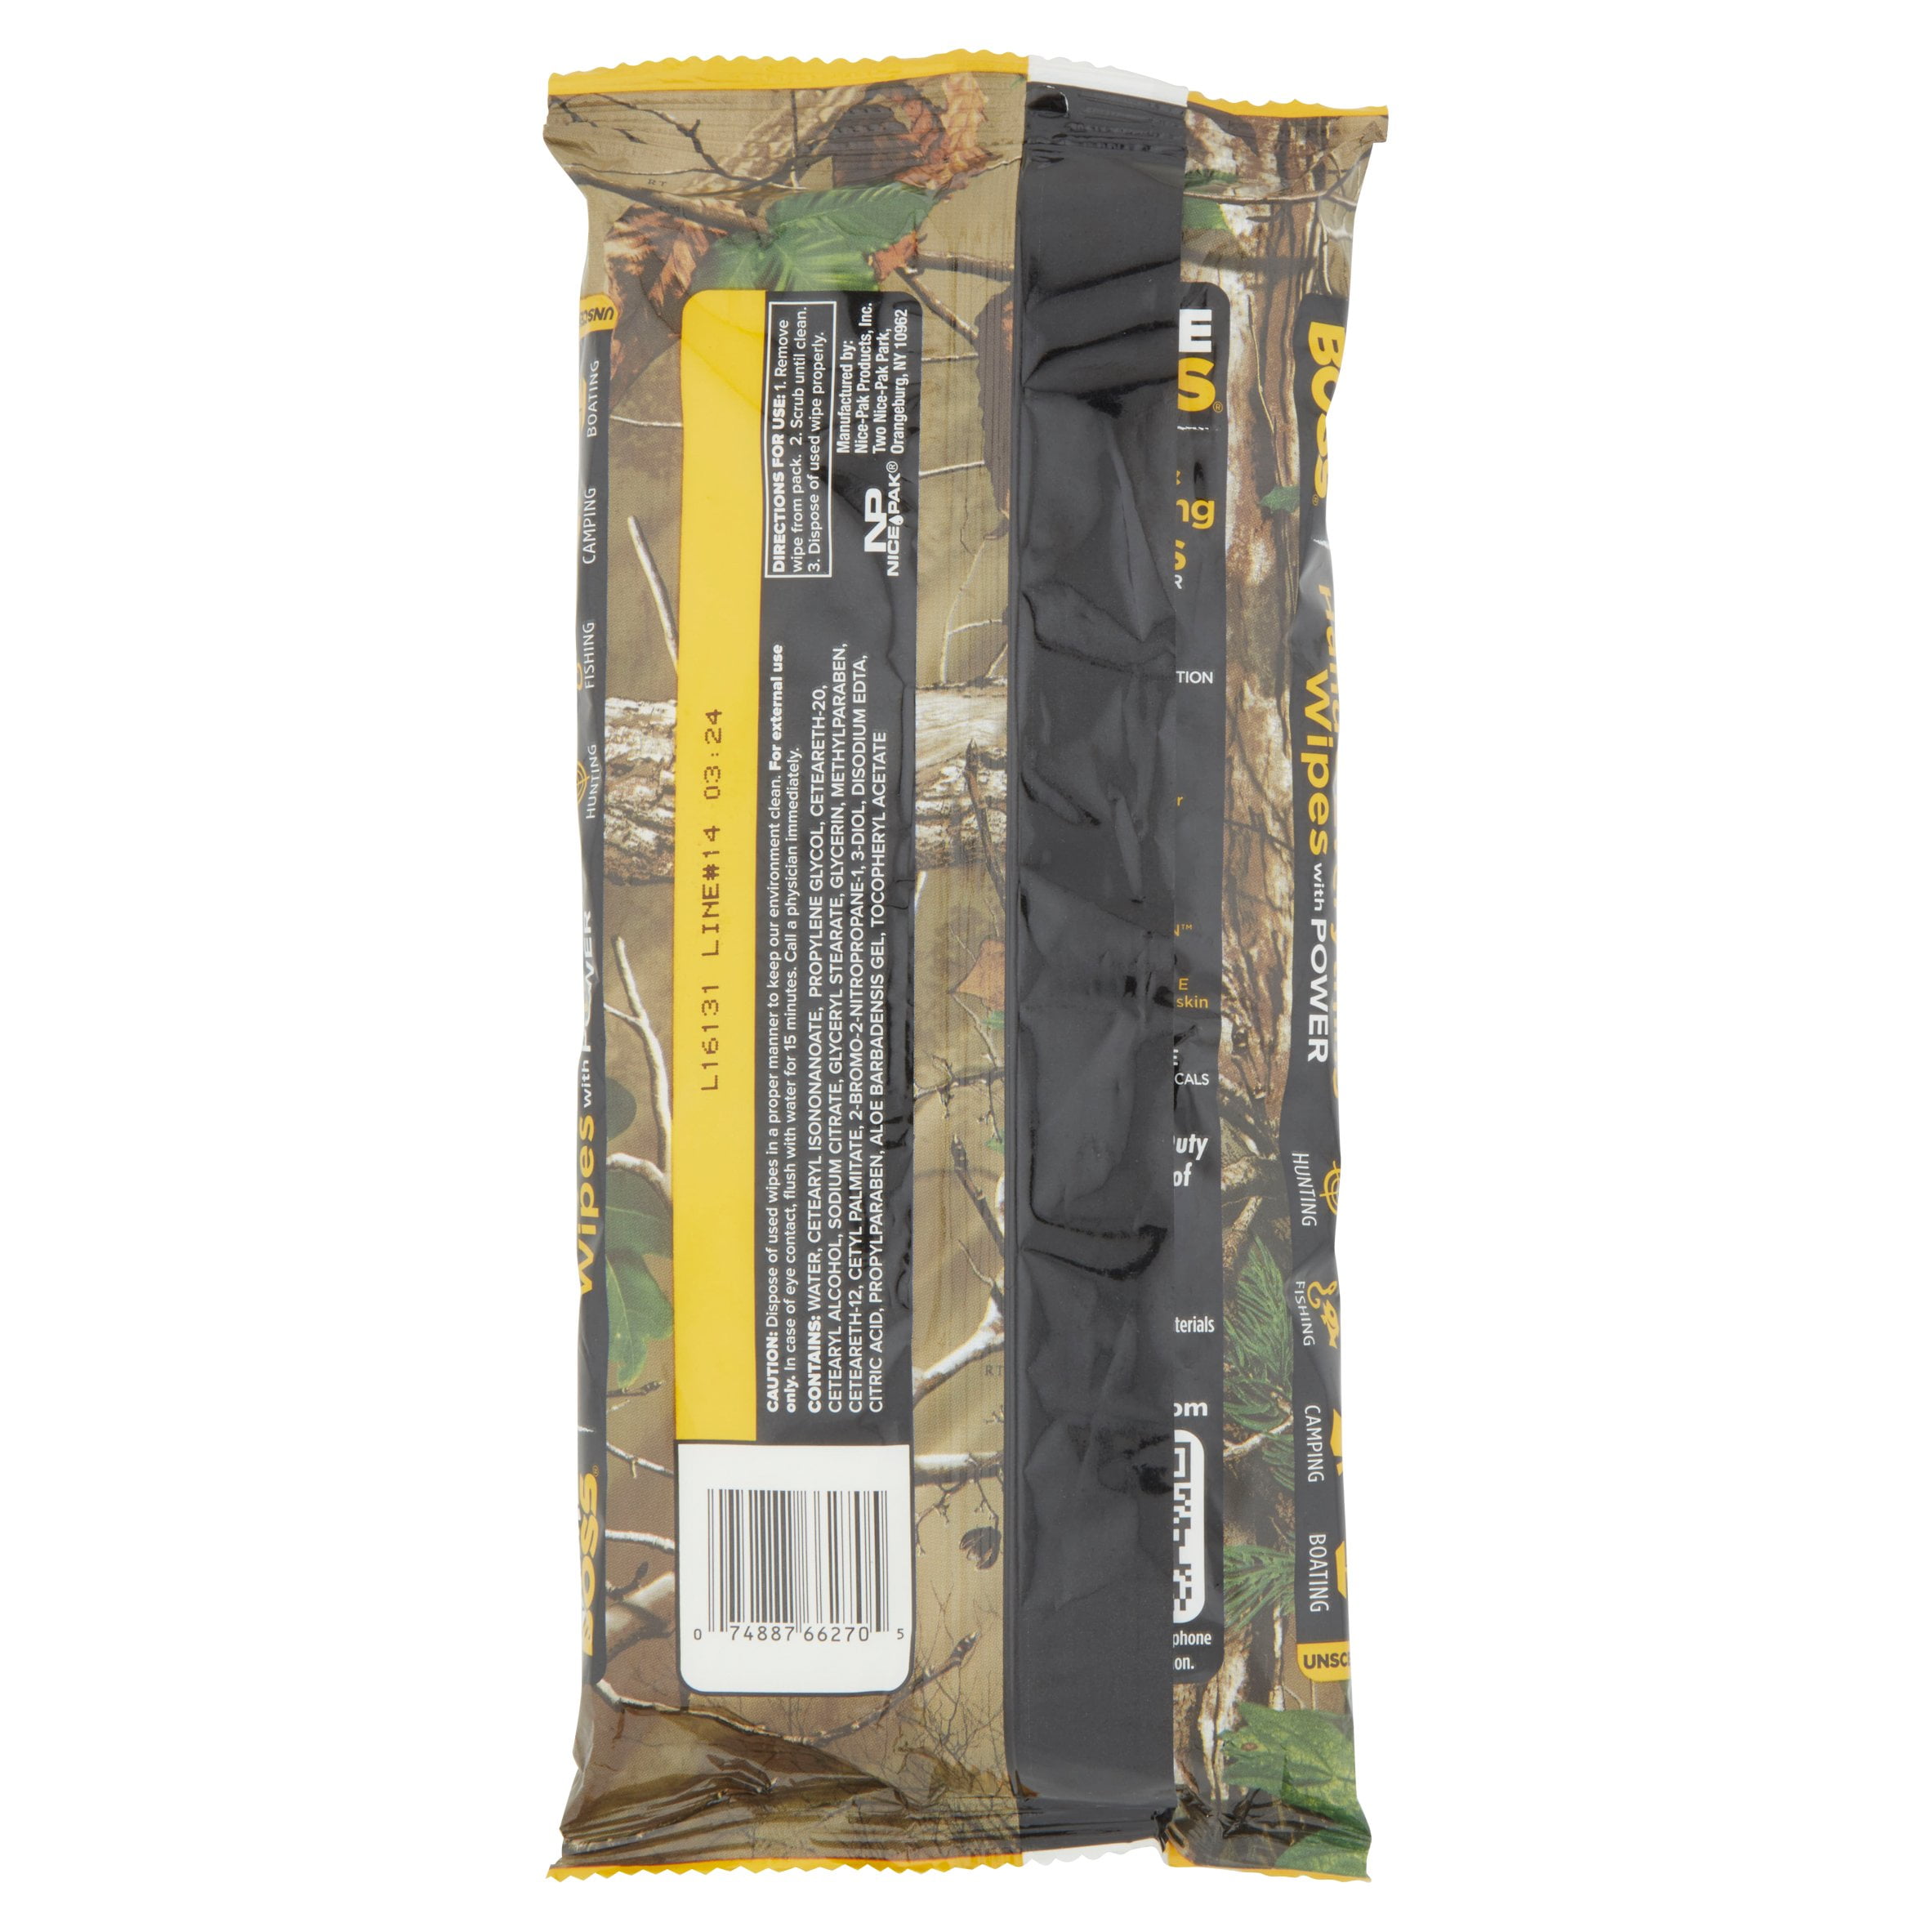 Grime Boss Wipes Hunting Unscented 48 Extra Large Hunting Wipes